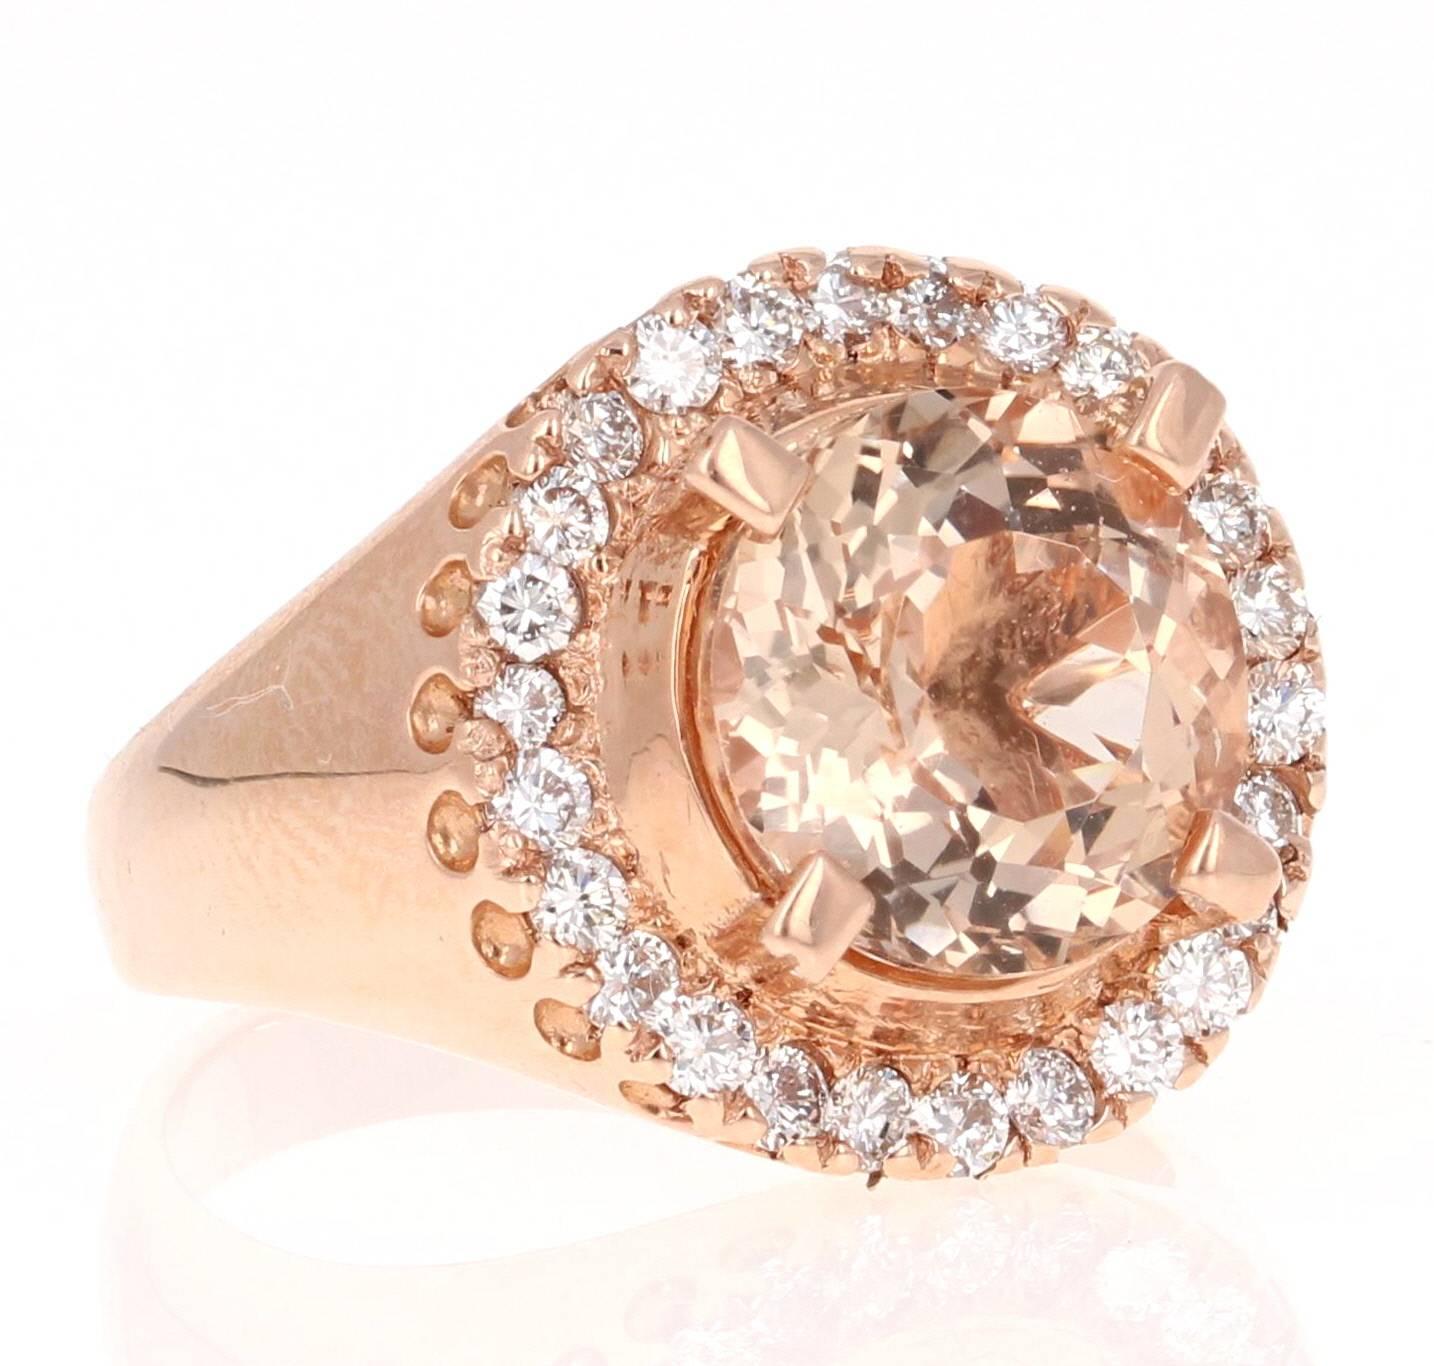 14K Rose Gold Ring that has a beautiful Round Cut Morganite that weighs 3.96 Carats. The Morganite is surrounded by 26 Round Cut Diamonds which weigh 0.65 Carats. The ring is a size 7, and can be re-sized at no additional charge, if needed. 